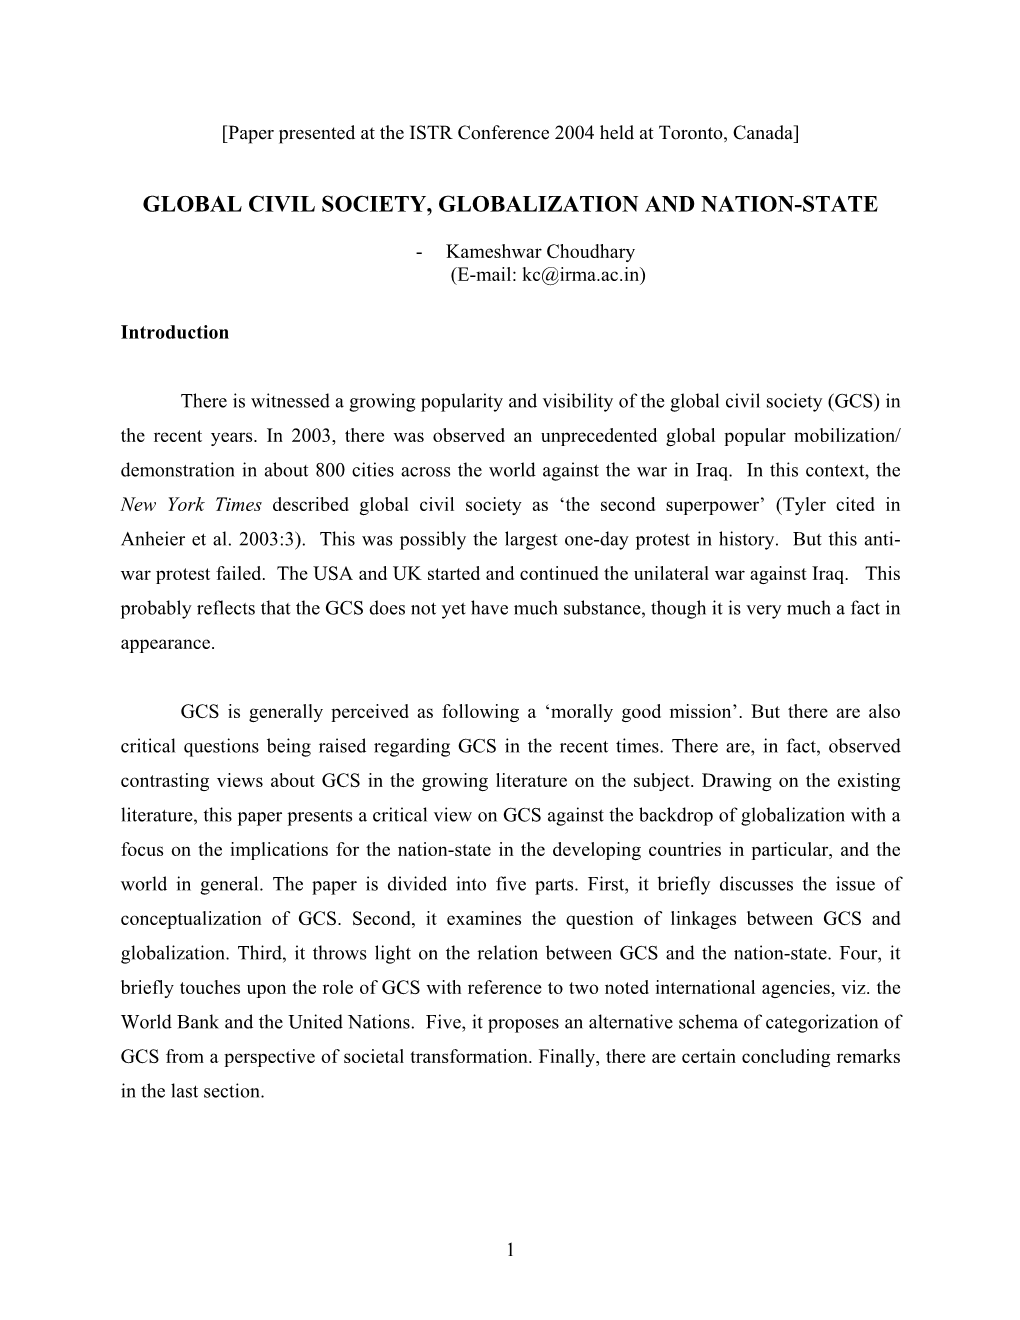 Global Civil Society, Globalization and Nation-State